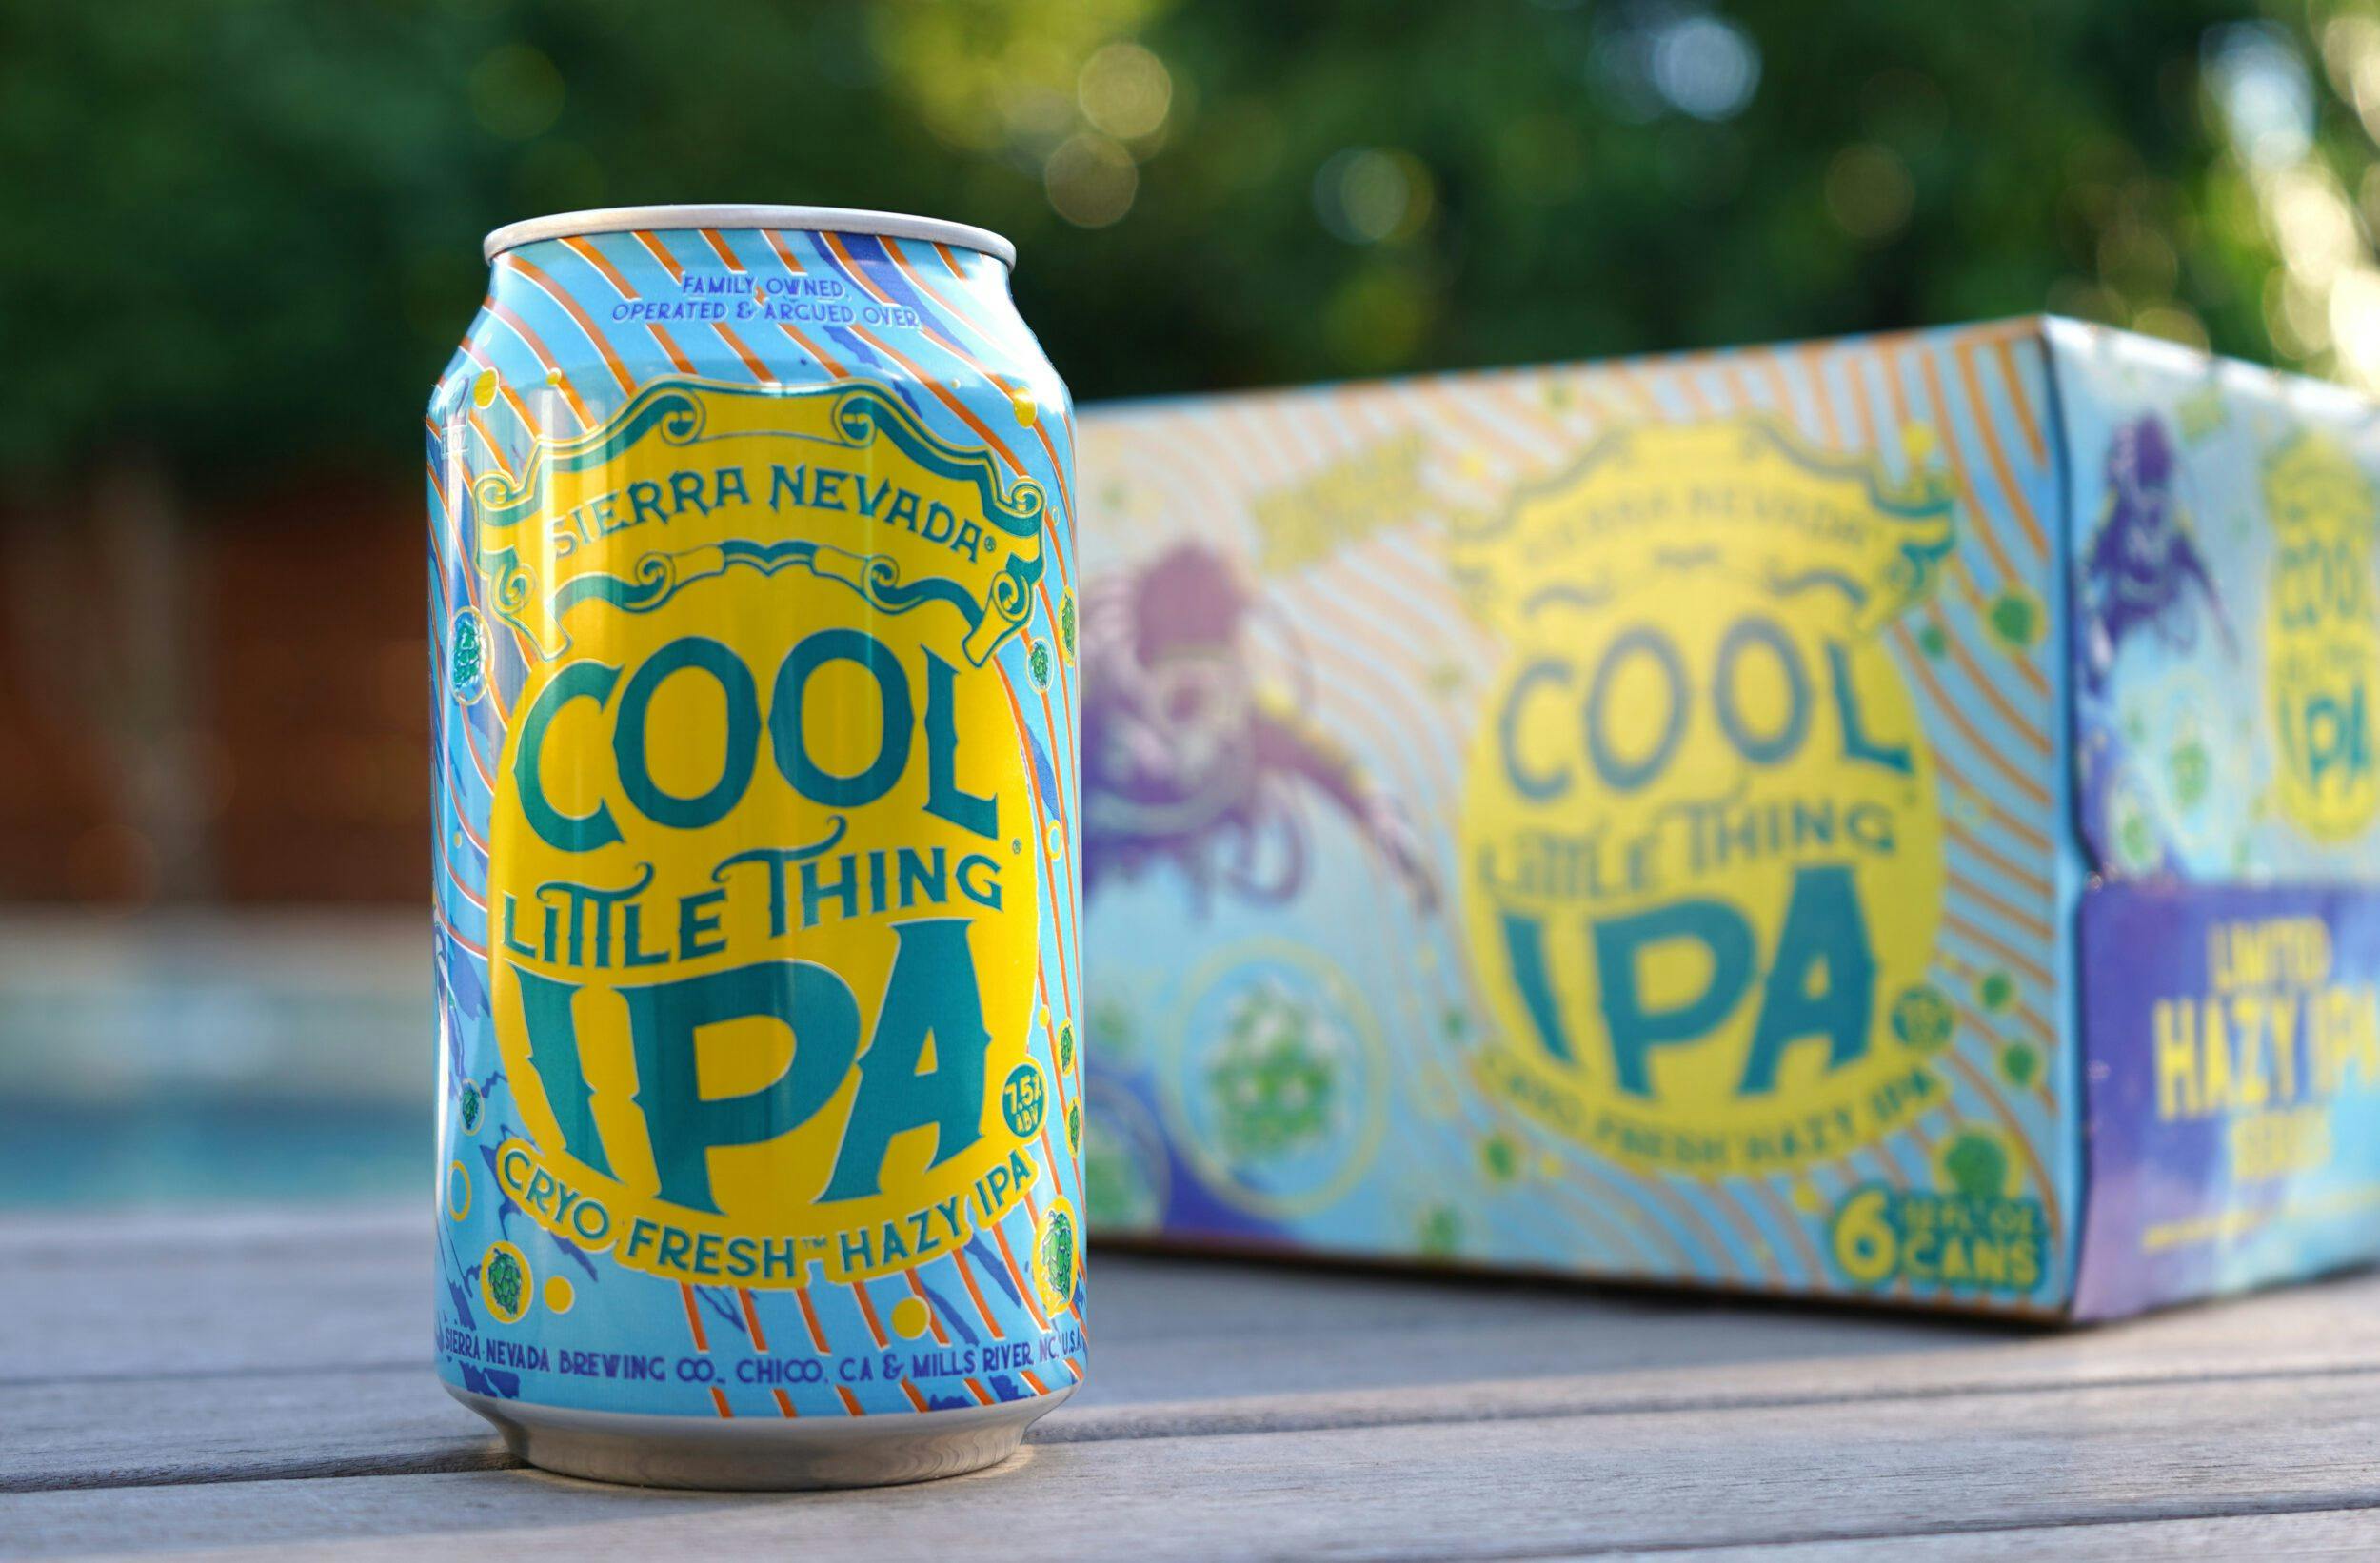 Cool Little Thing 6-pack and can outside